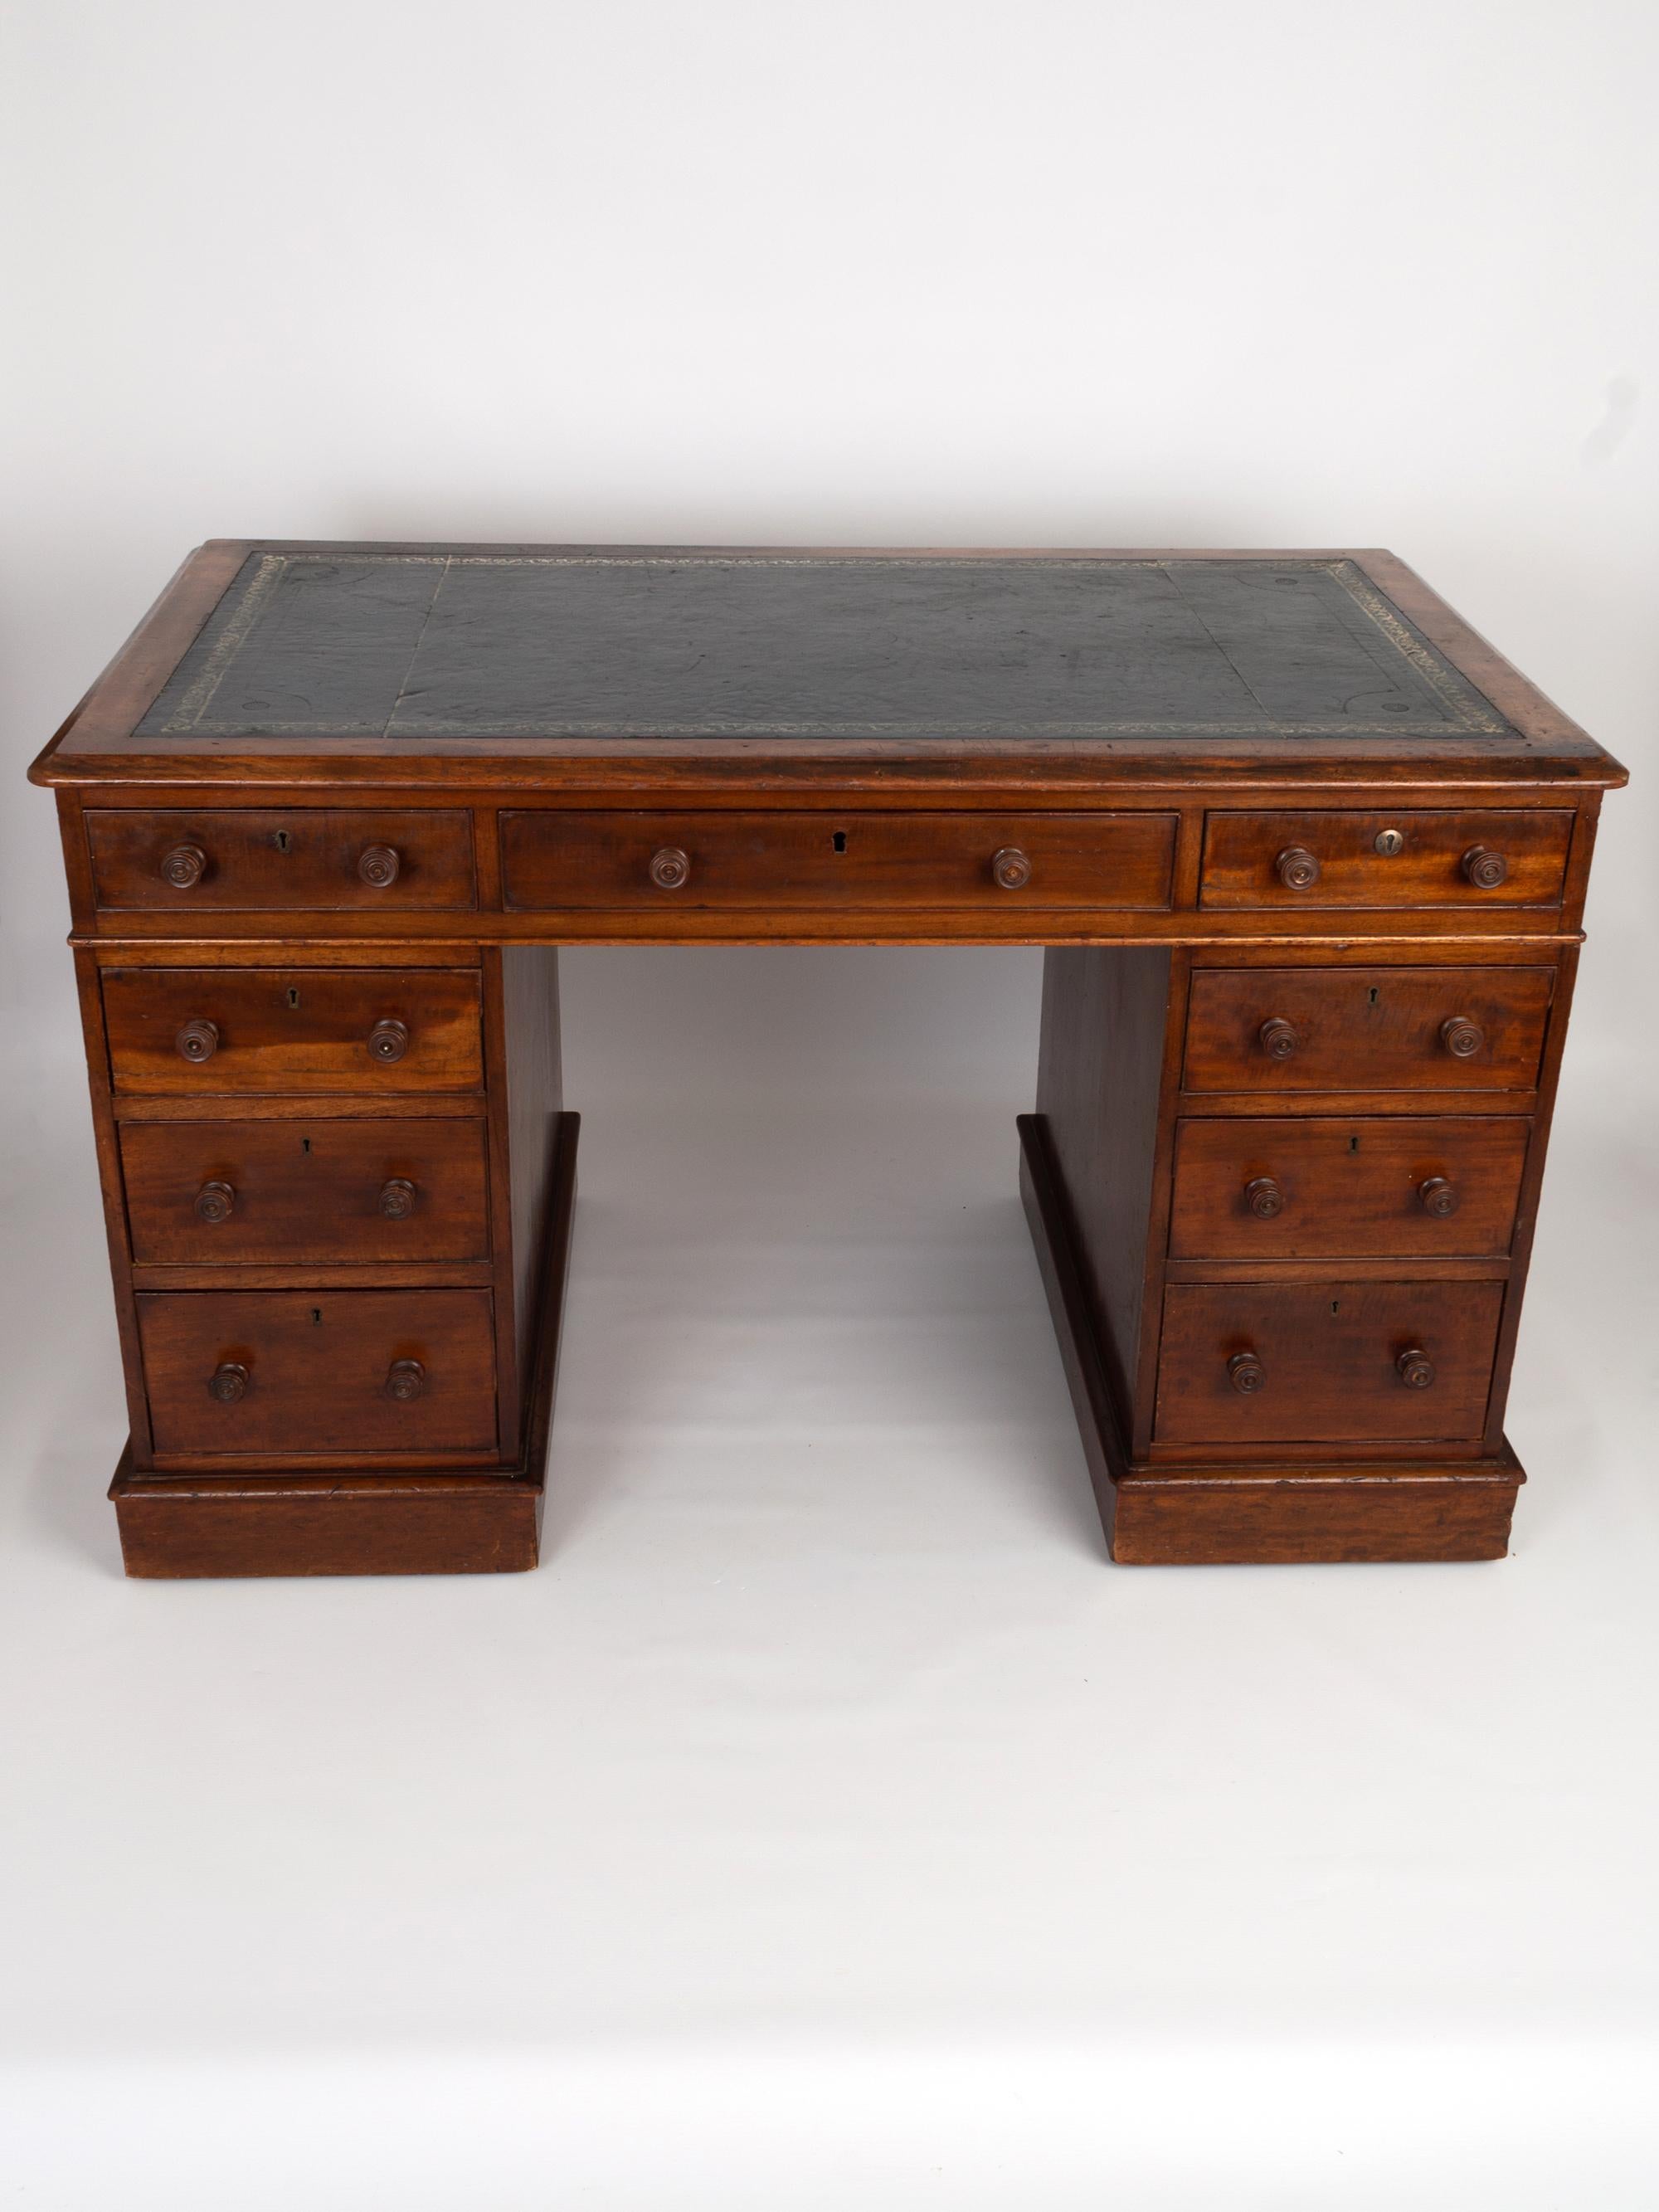 A superb English antique Victorian mahogany pedestal desk dating from C.1850. 
The moulded writing surface has a tooled blue leather finish. The central drawer beneath is flanked by four drawer pedestals with turned mahogany handles and brass